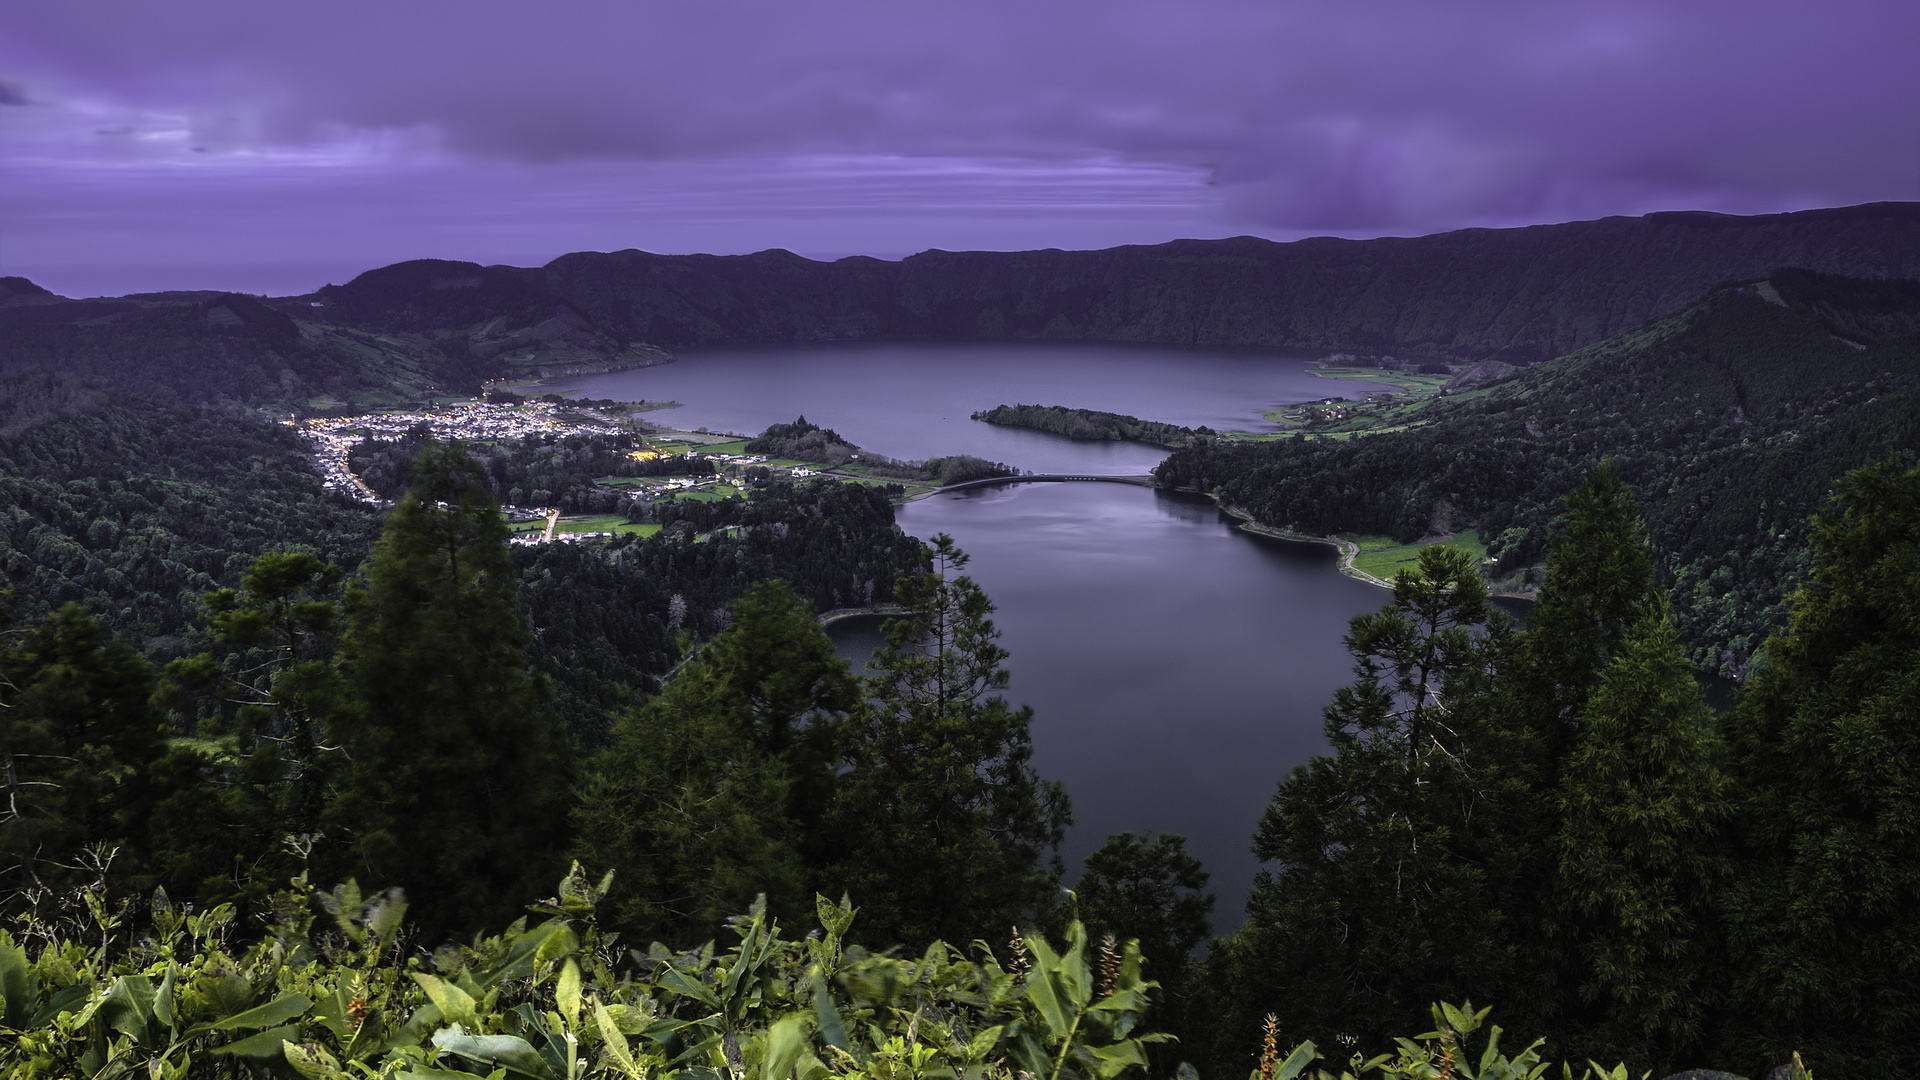 Sao Miguel Azores, Portugal wallpapers, High-quality images, Download, 1920x1080 Full HD Desktop